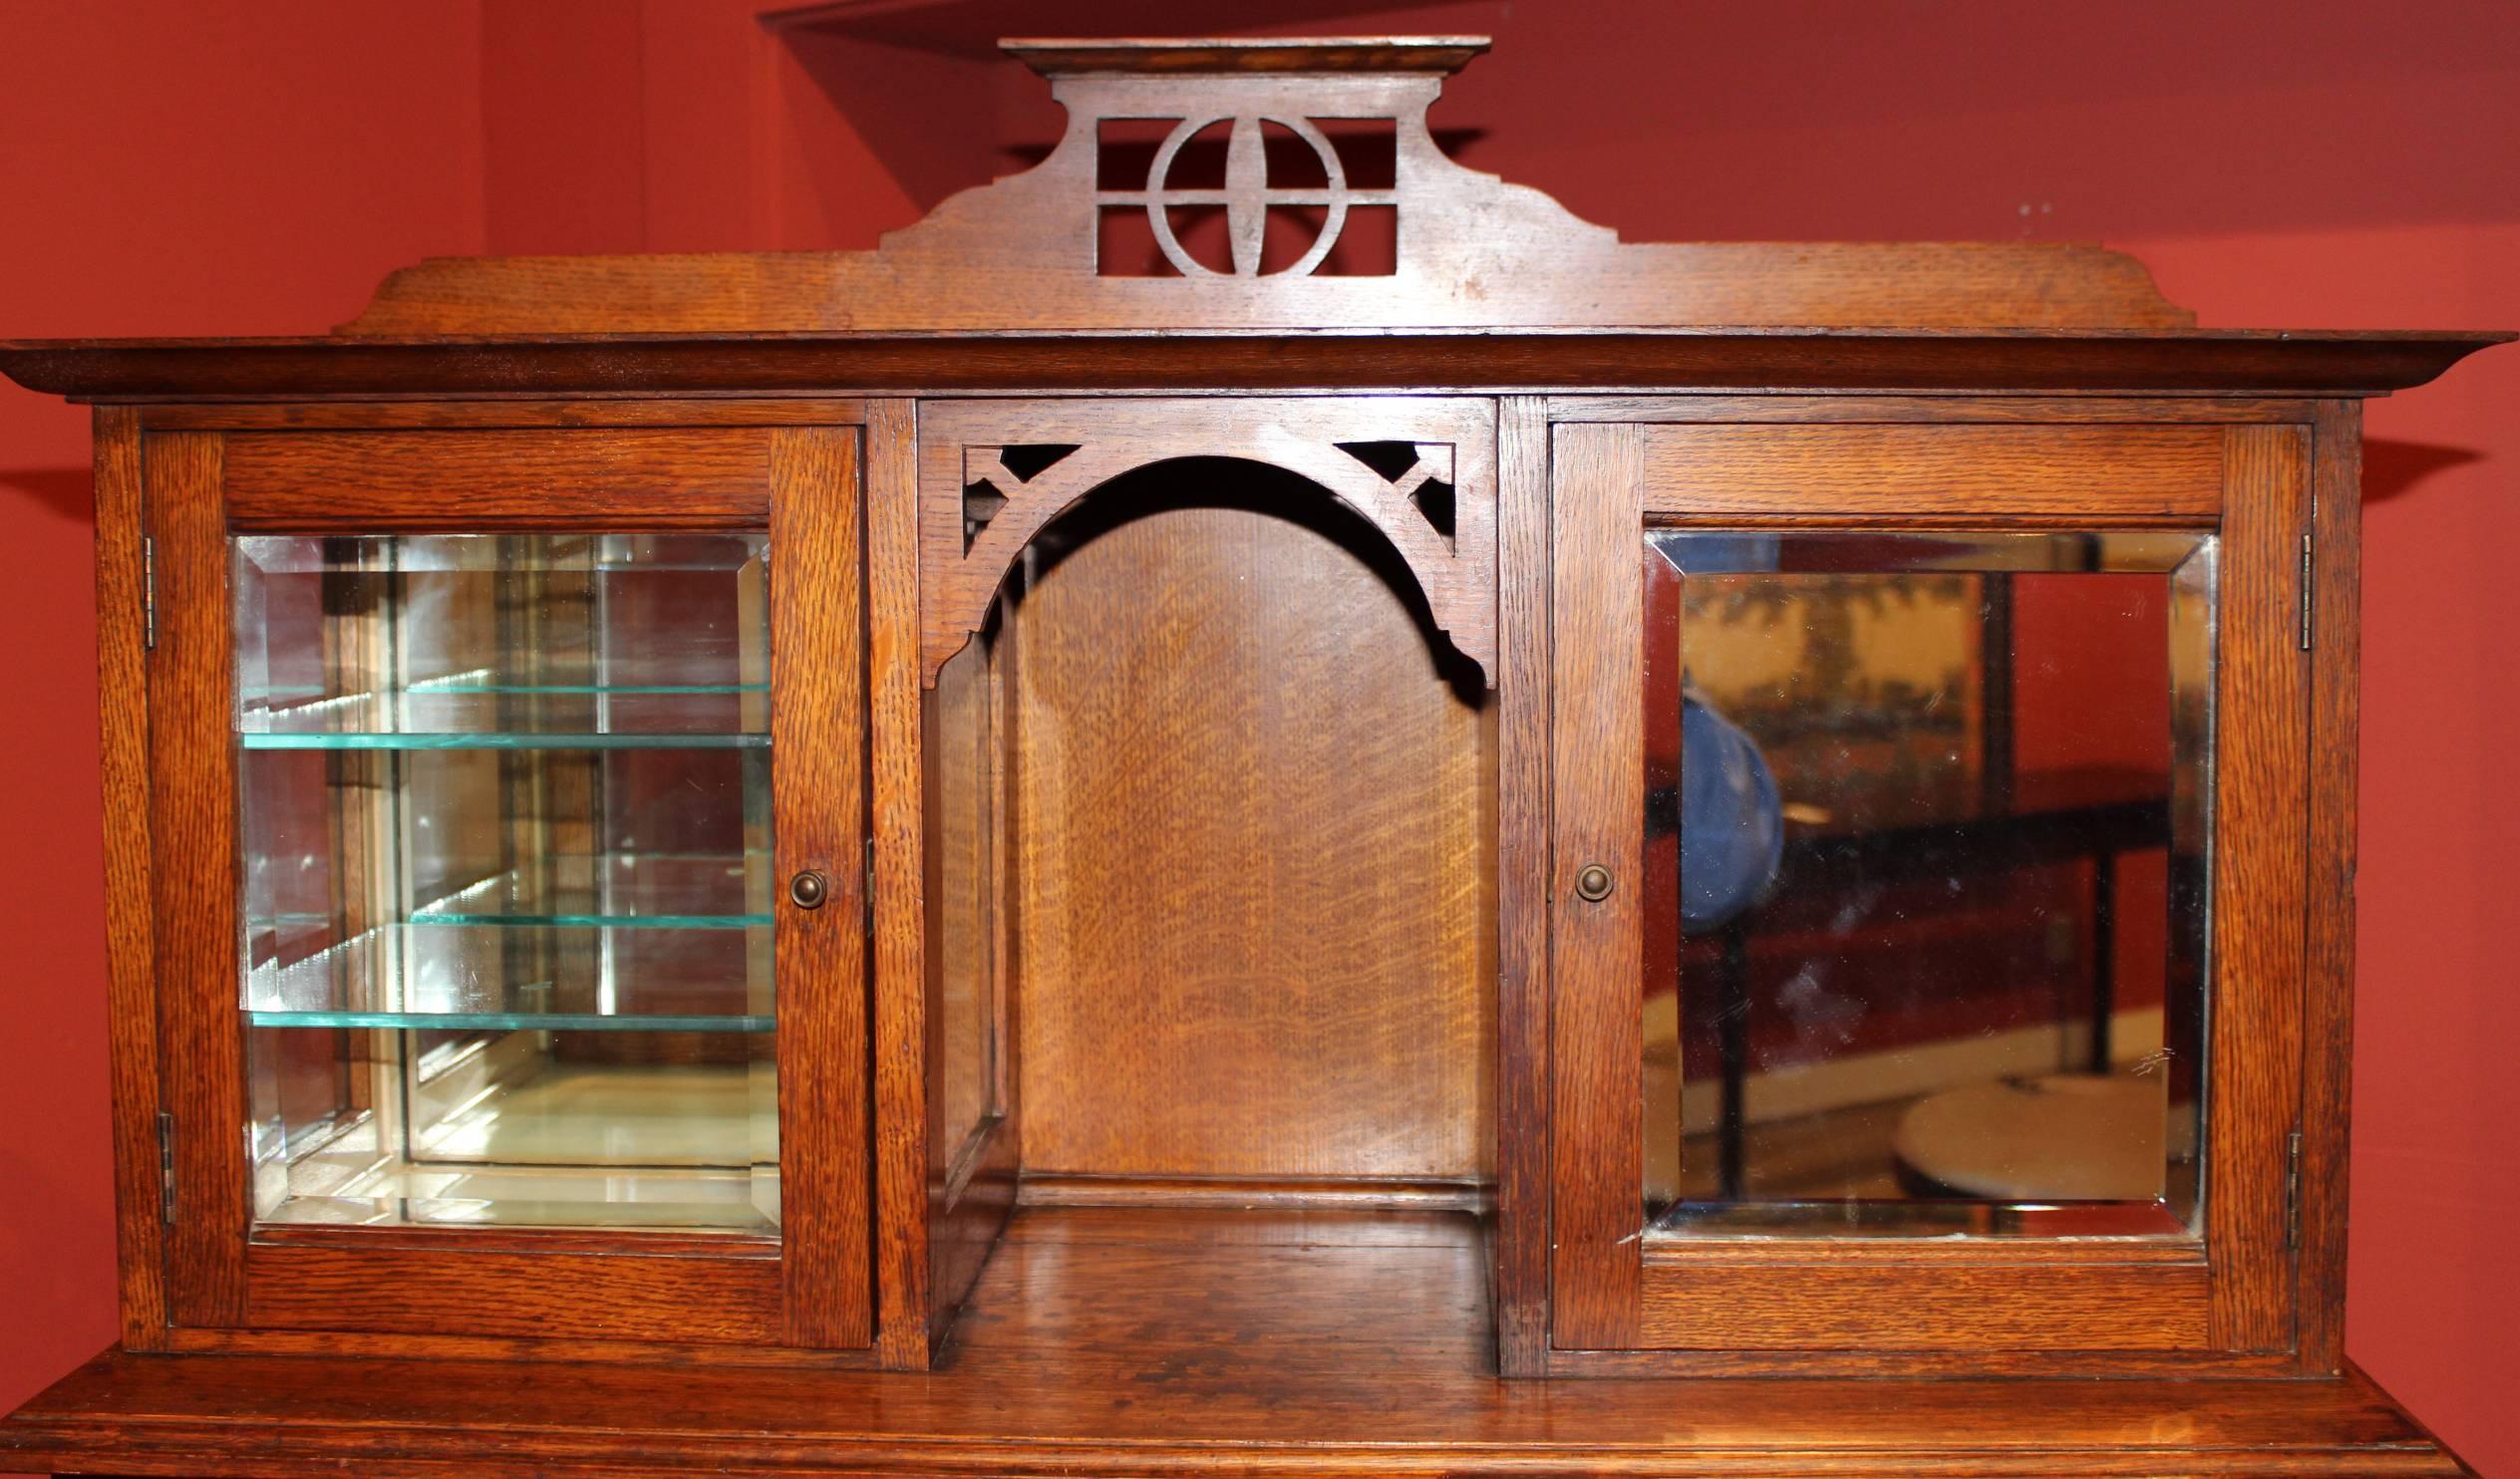 Splendid oak Art Nouveau dental cabinet with polychrome inlay and decorative foliate hardware on the front door panels, upper mirrored compartments with glass shelves on the left and graduated interior shelves on the right, over a center section